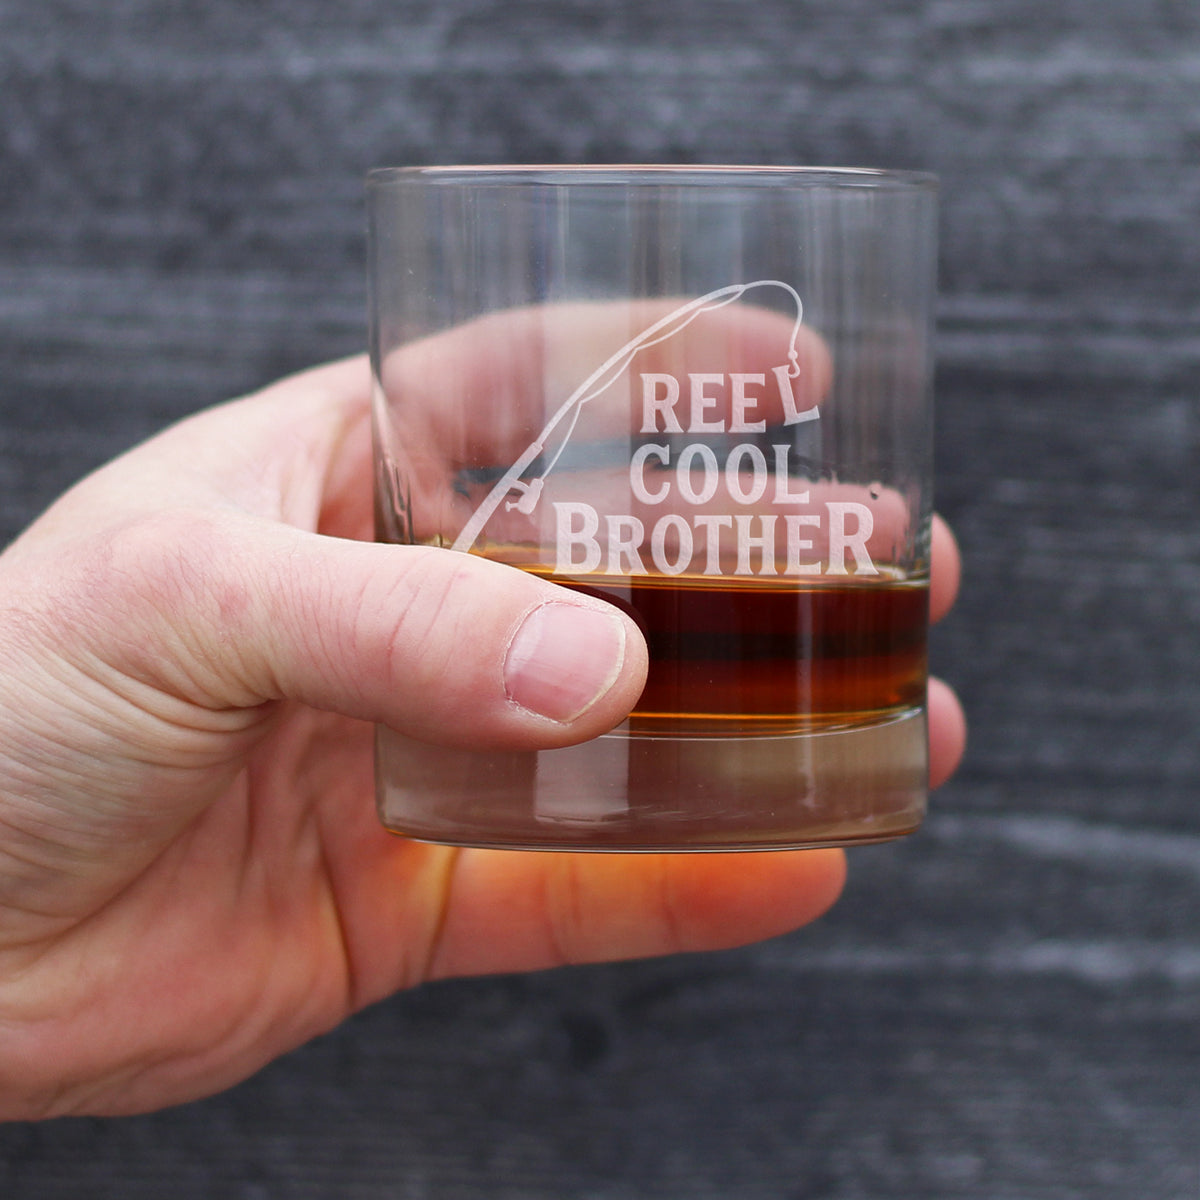 Reel Cool Brother - Funny Whiskey Rocks Glass - Fishing Gifts for Brothers - Engraved 10.25 oz Glasses - Fun Fish Cups